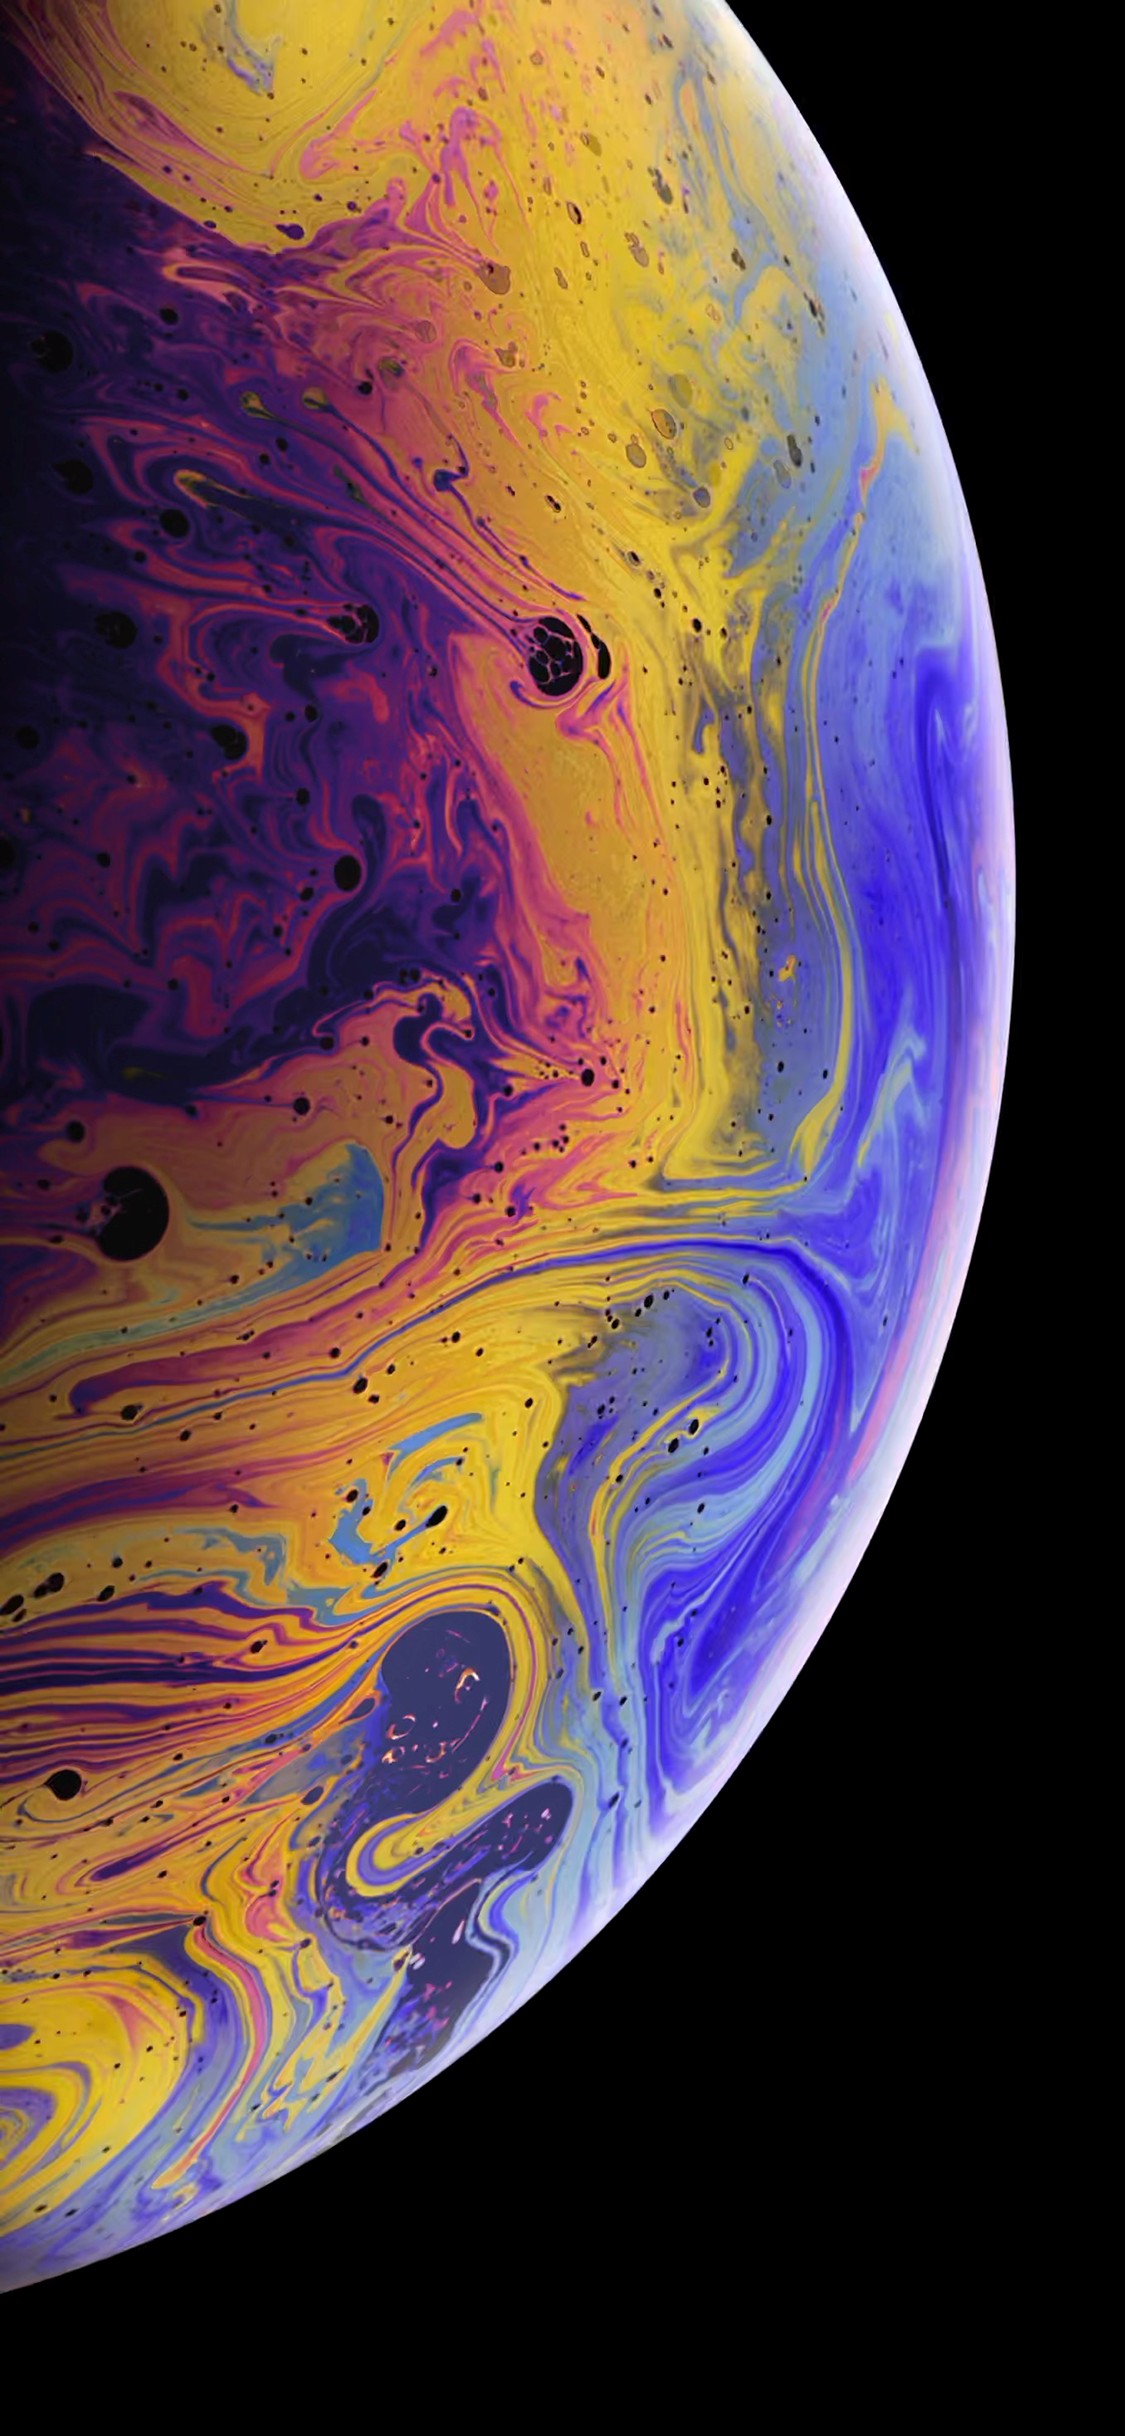 Iphone Xs Screen Lock Wallpaper With High-resolution - Lock Screen  Wallpaper Hd - 1125x2436 Wallpaper 